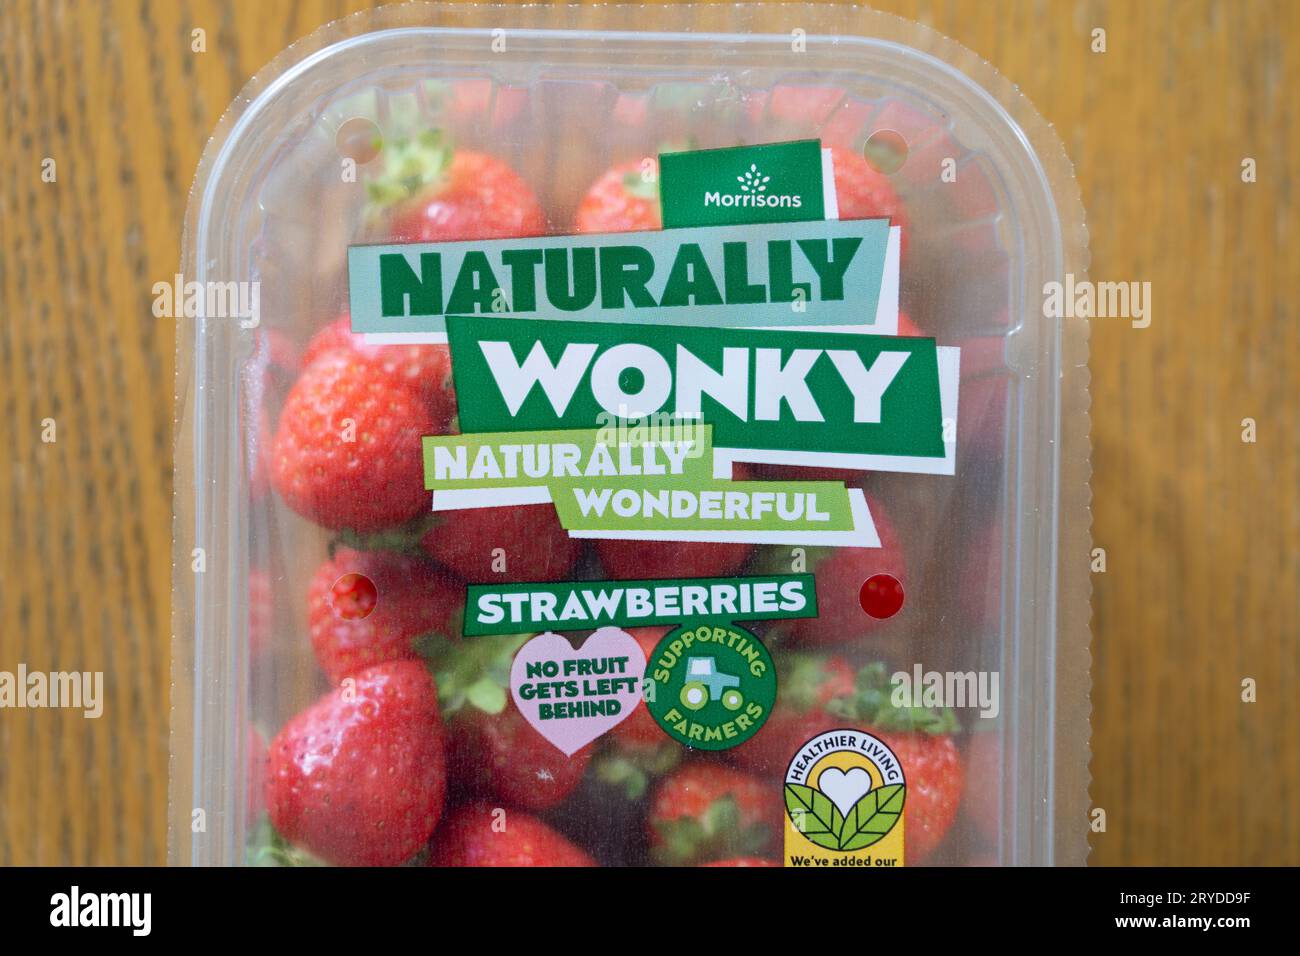 Morrisons supermarket own brand strawberries in packet, labelled as Naturally Wonky. Concept: trying to reduce UK food waste, wonky fruit and veg Stock Photo